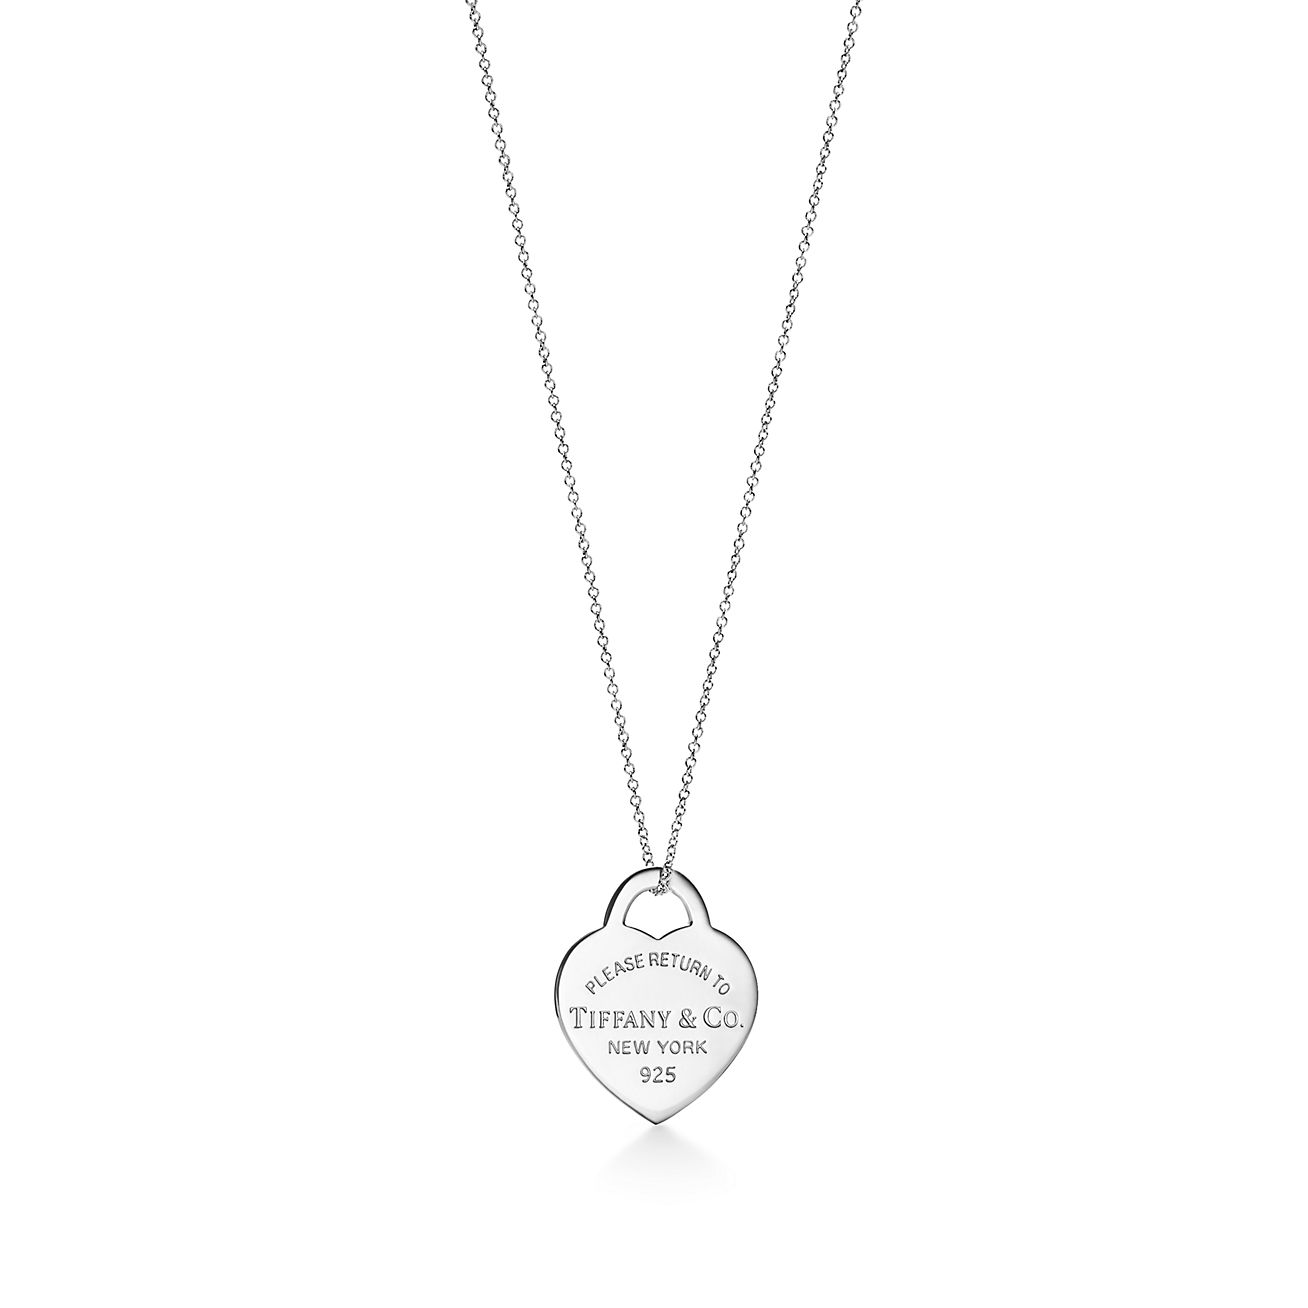 Return to Tiffany Heart Tag Bead Necklace in Silver with A Diamond, Small